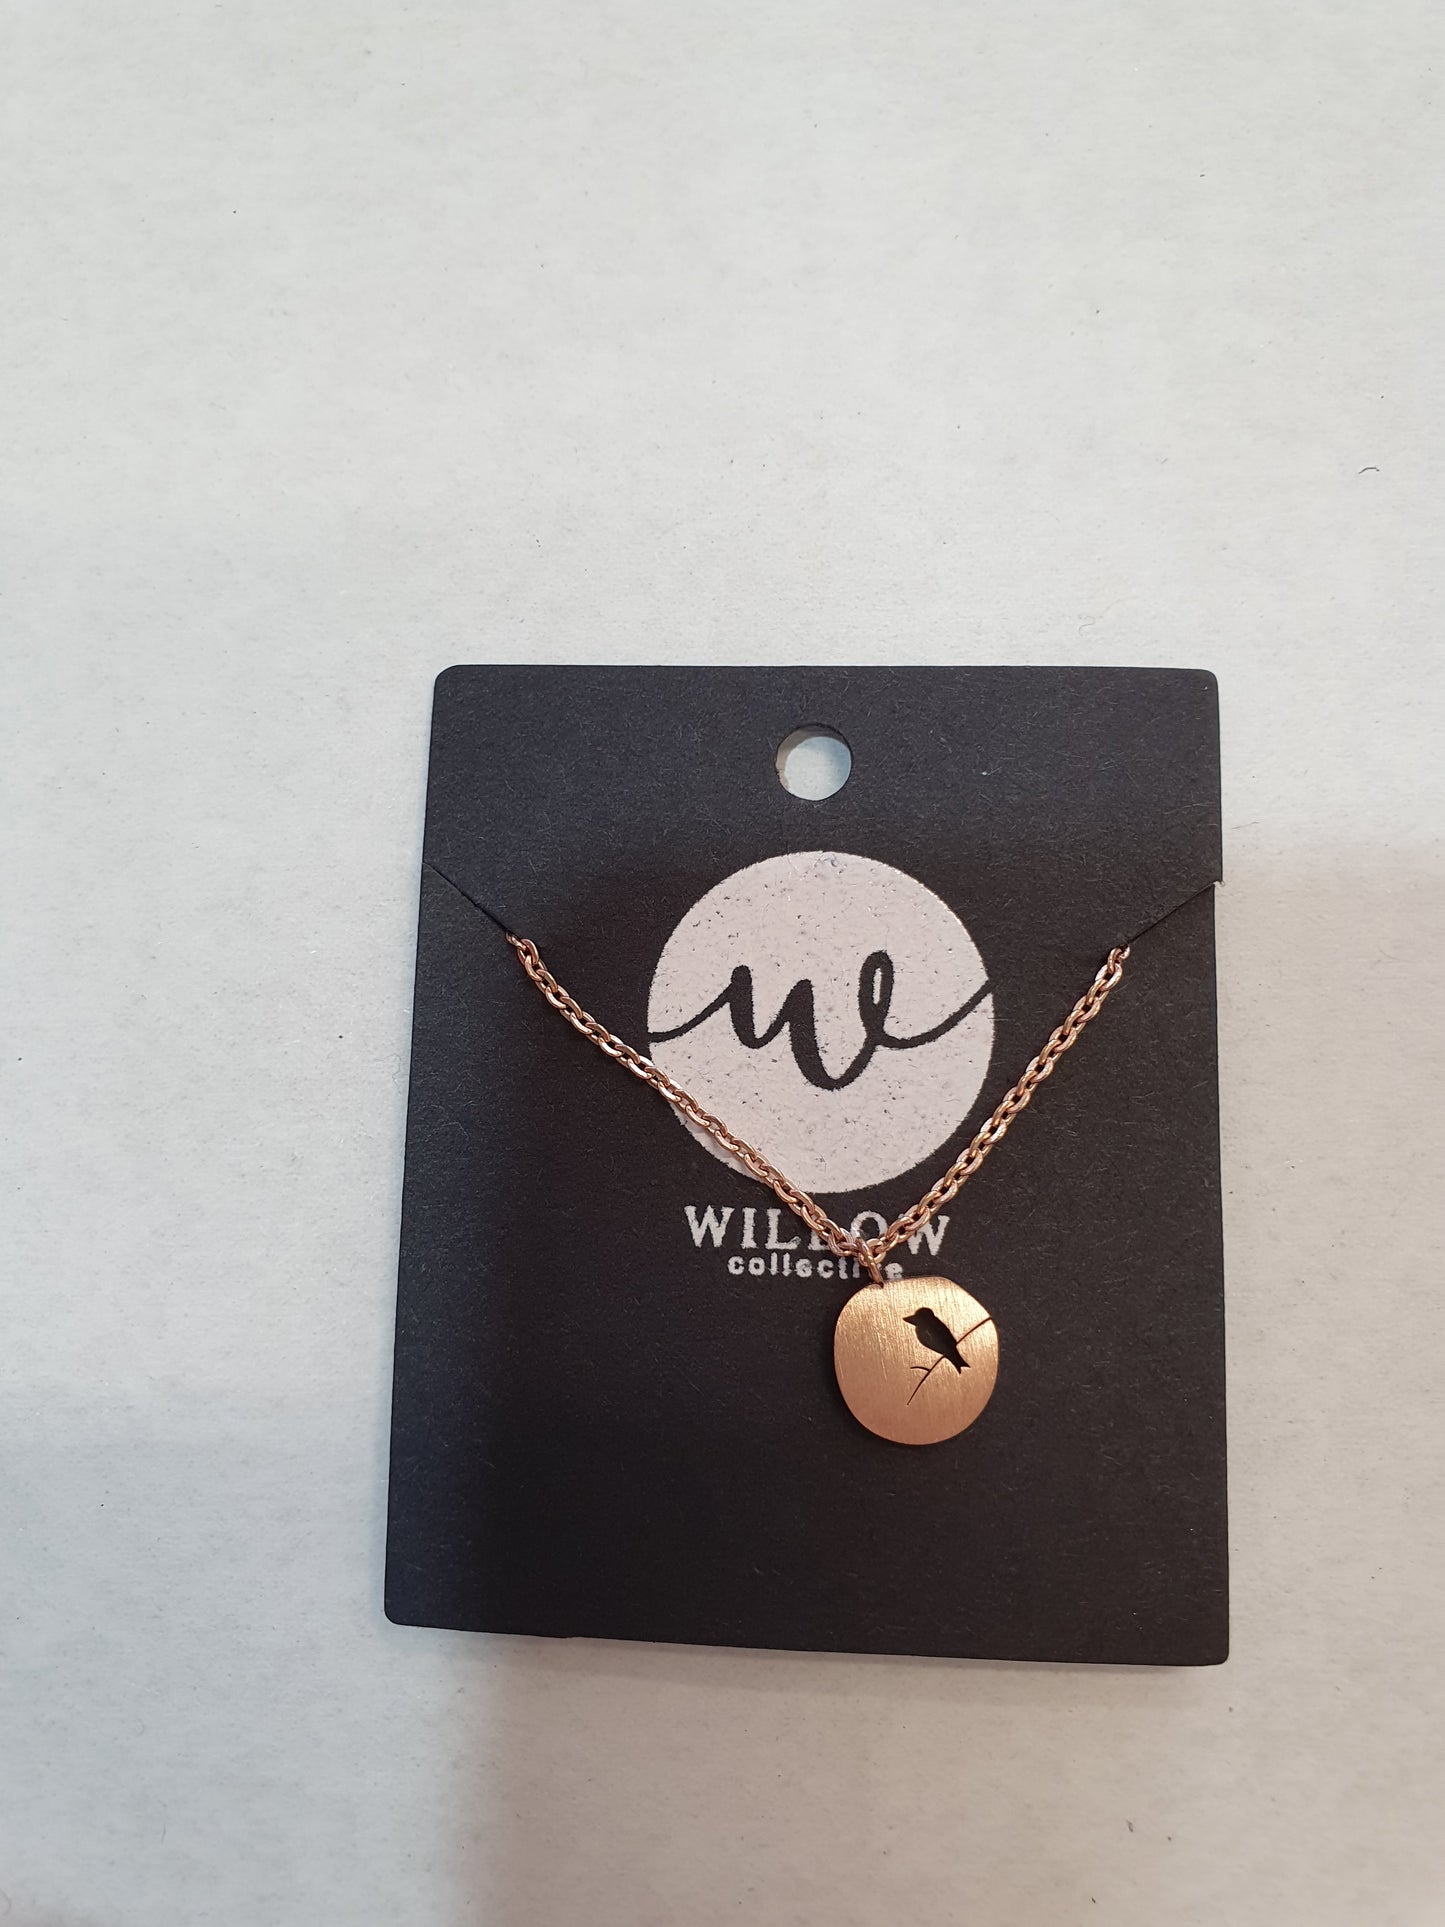 Willow Collective Rose Gold Necklace